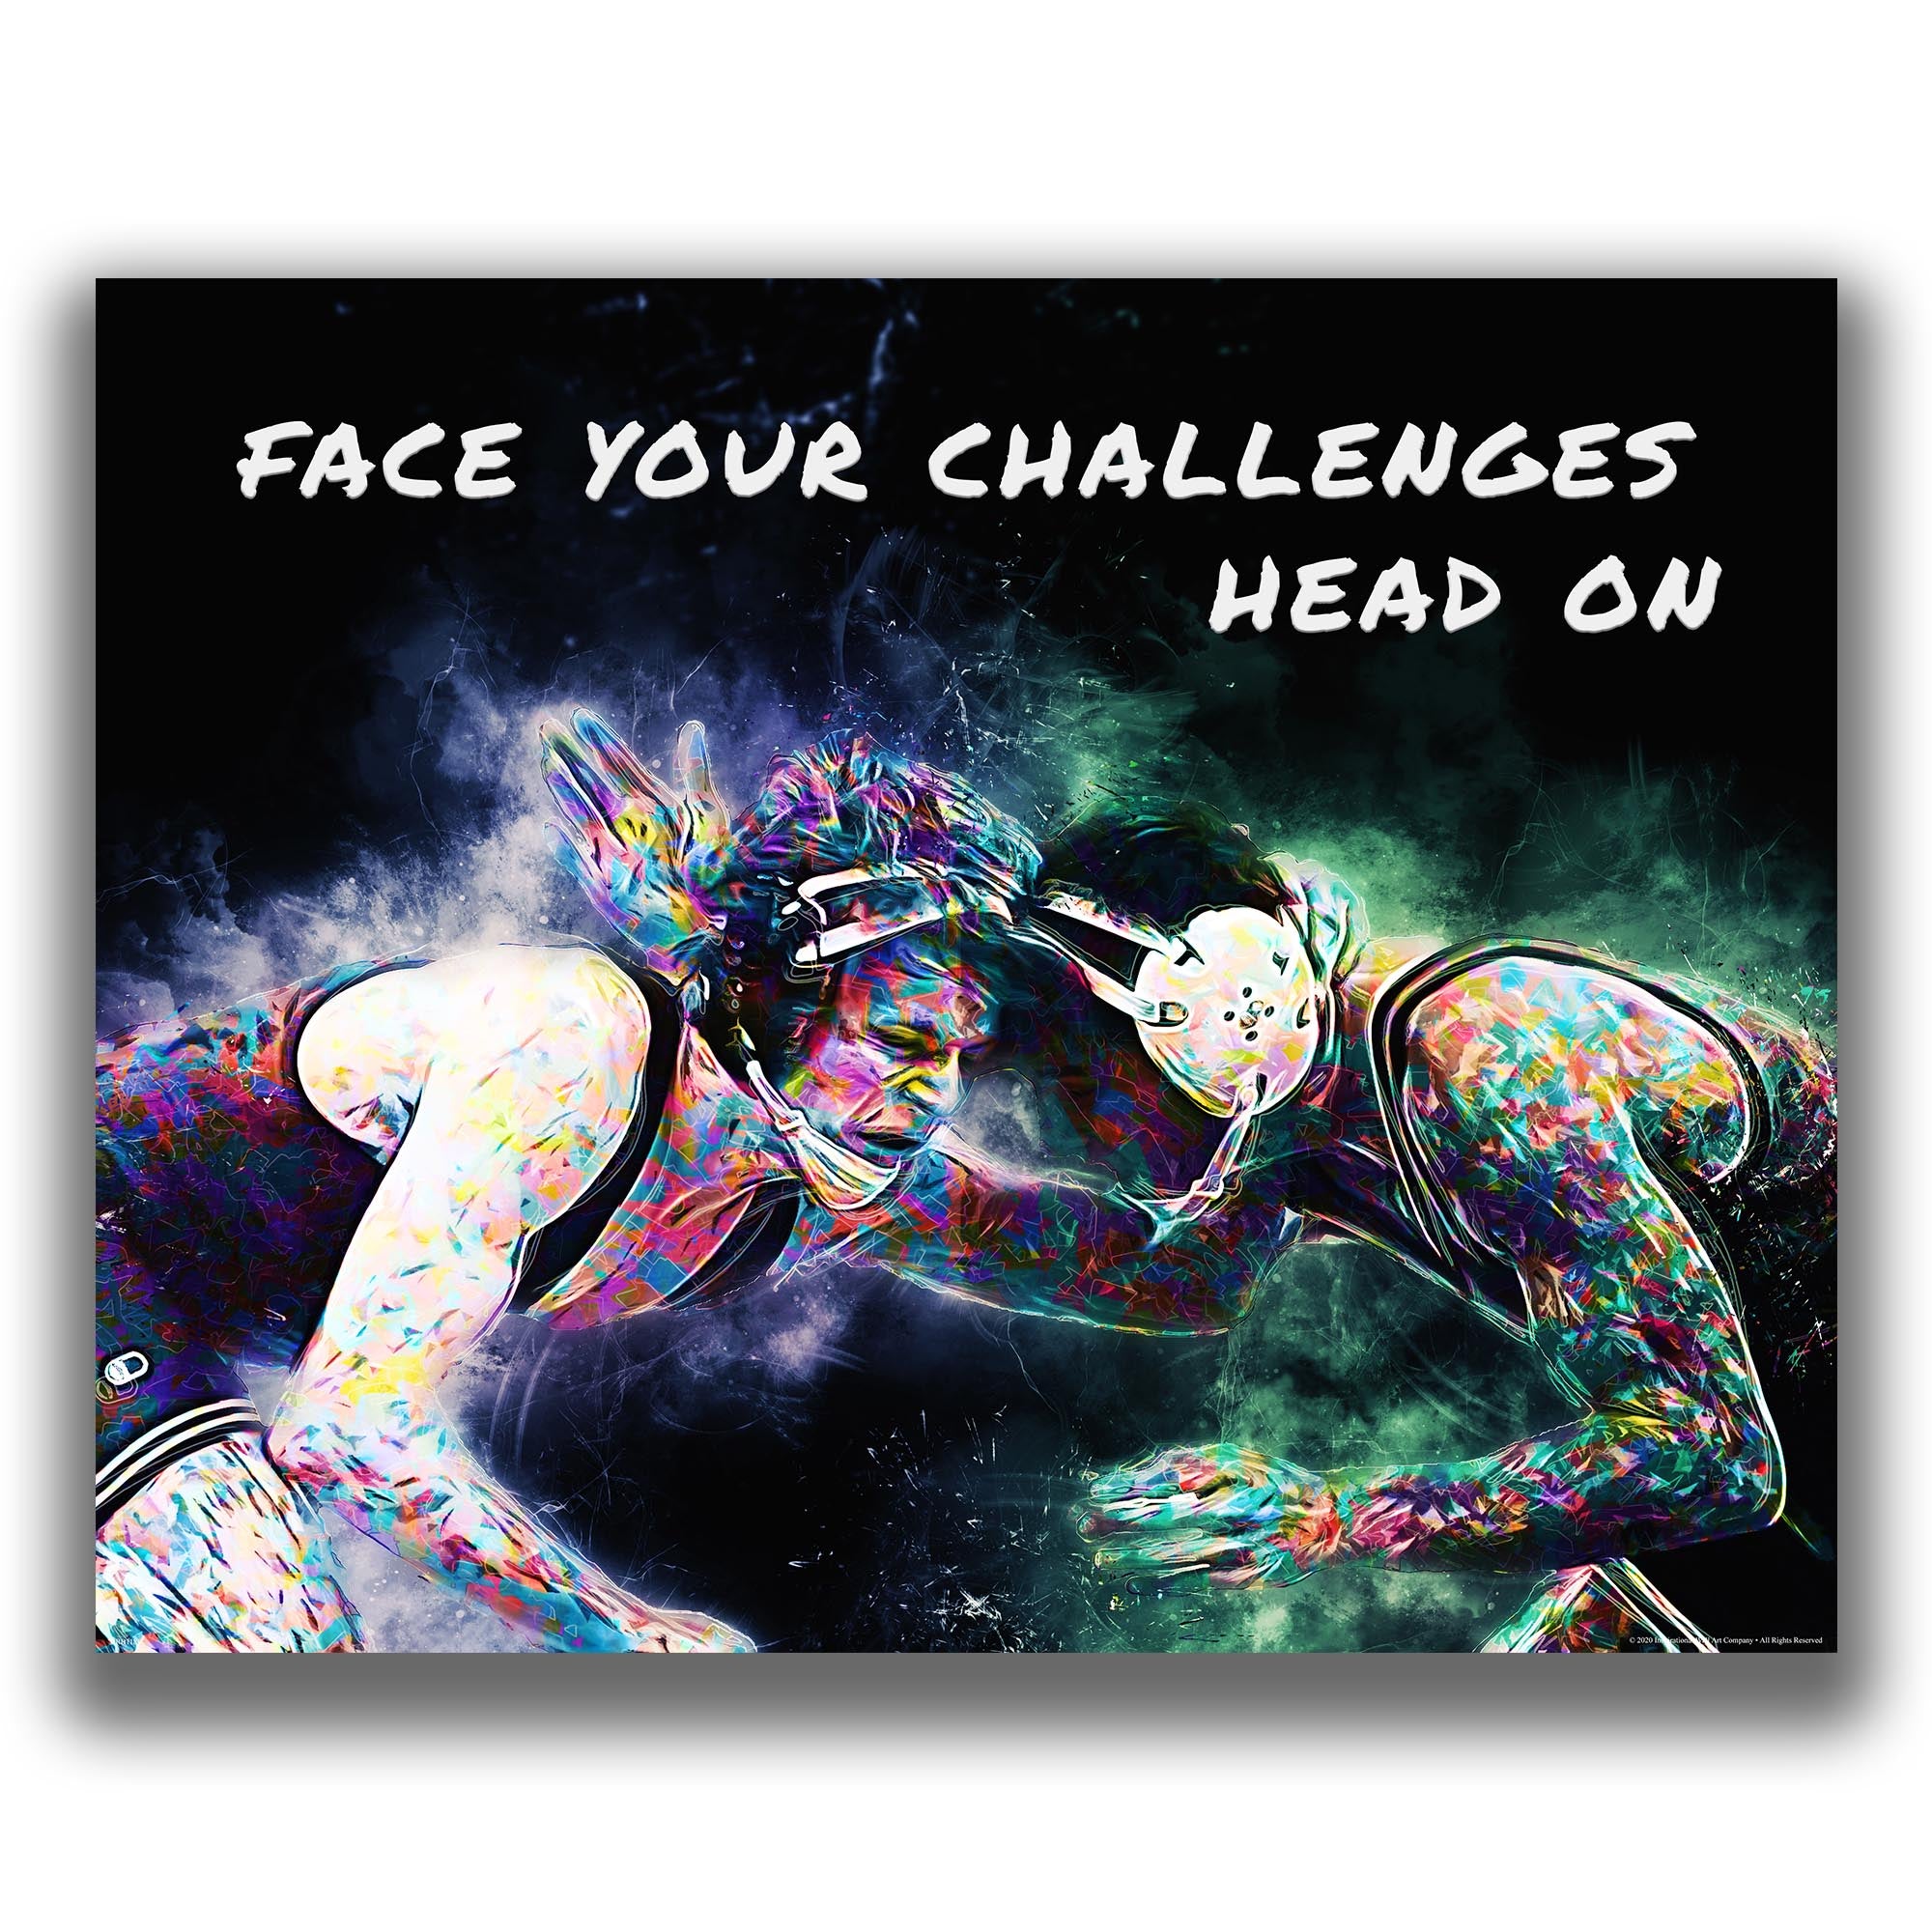 Face Your Challenges - Wrestling Poster